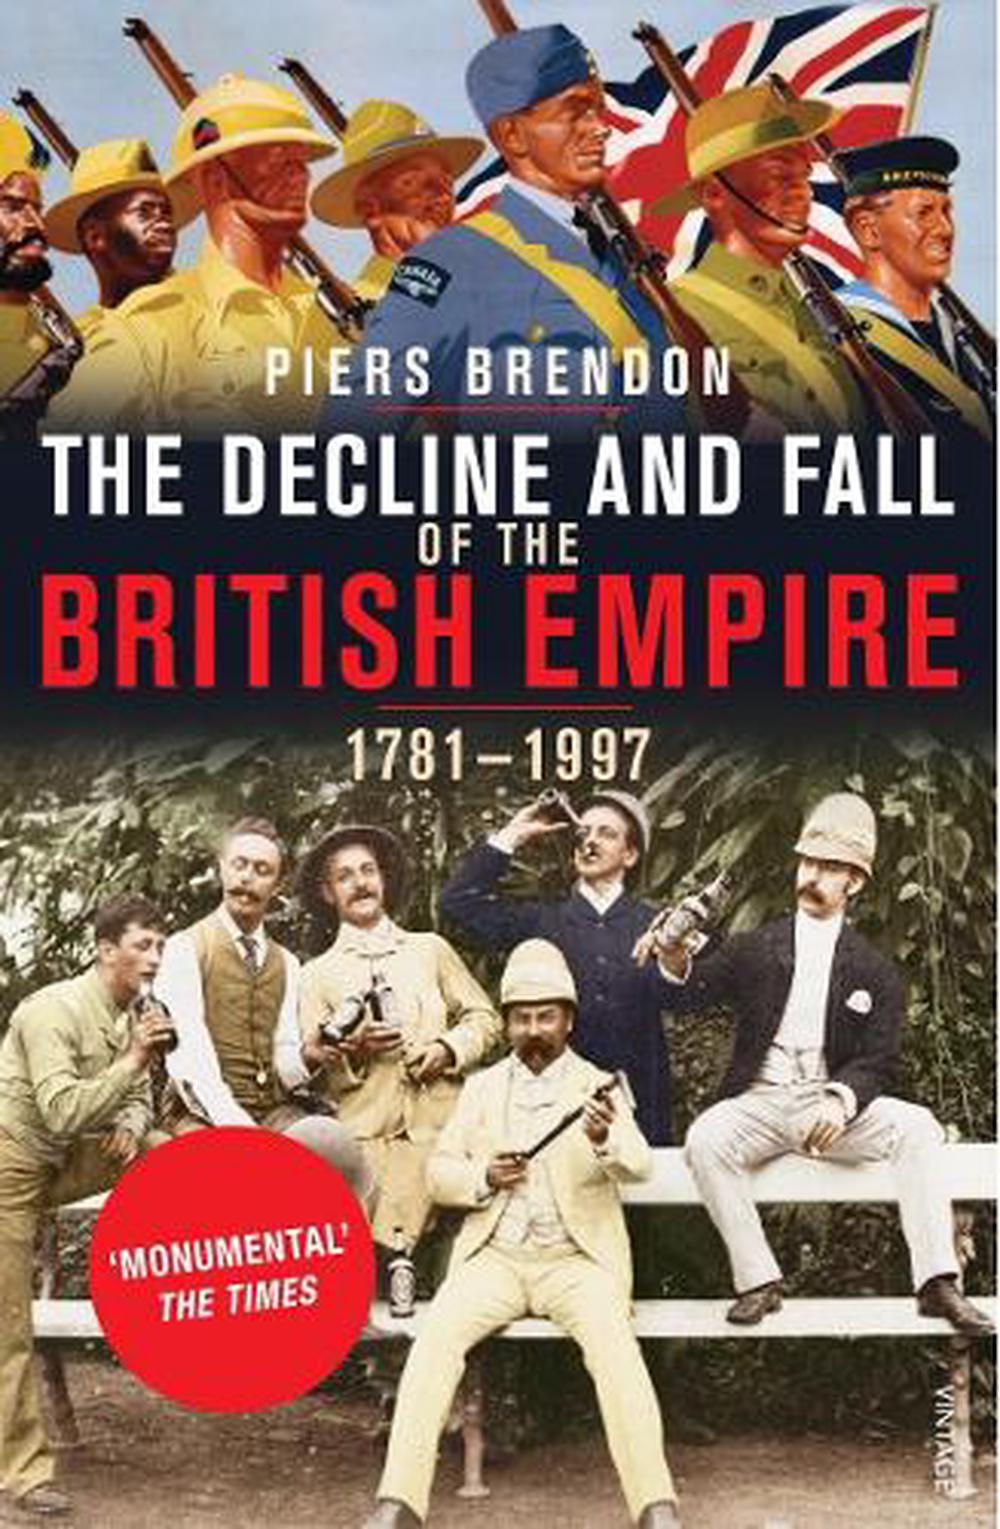 The Decline And Fall Of The British Empire By Piers Brendon Paperback 9780712668460 Buy